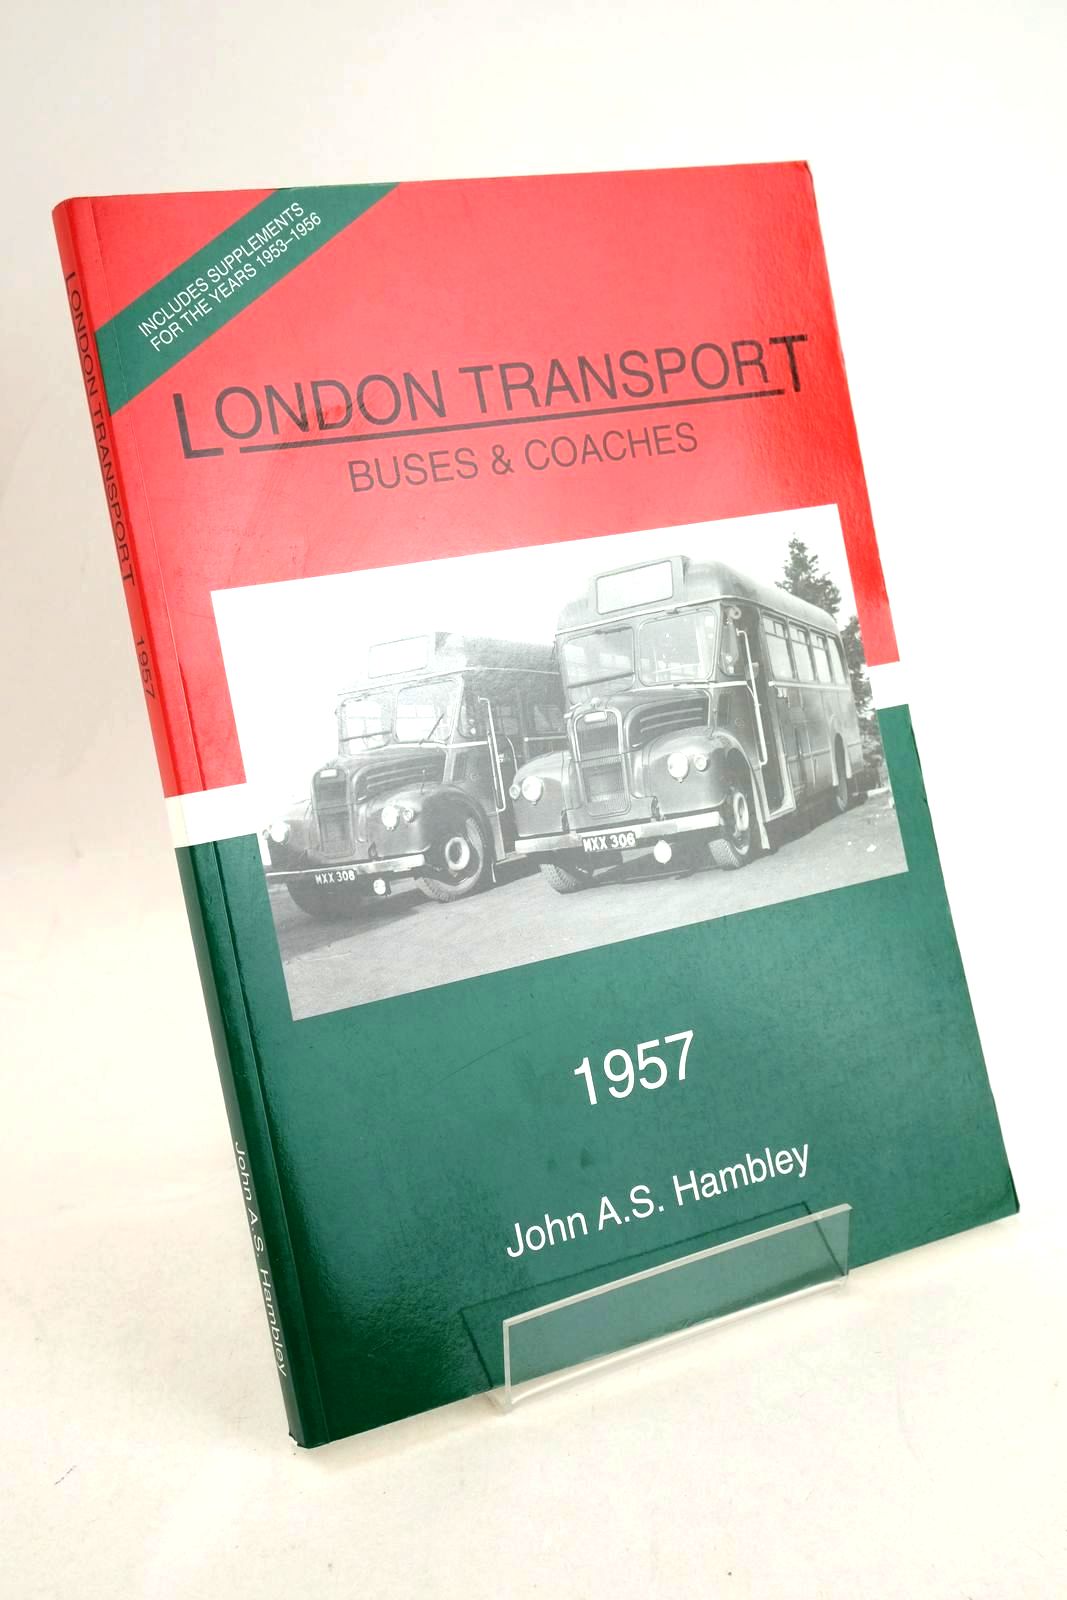 Photo of LONDON TRANSPORT BUSES & COACHES 1957- Stock Number: 1327376